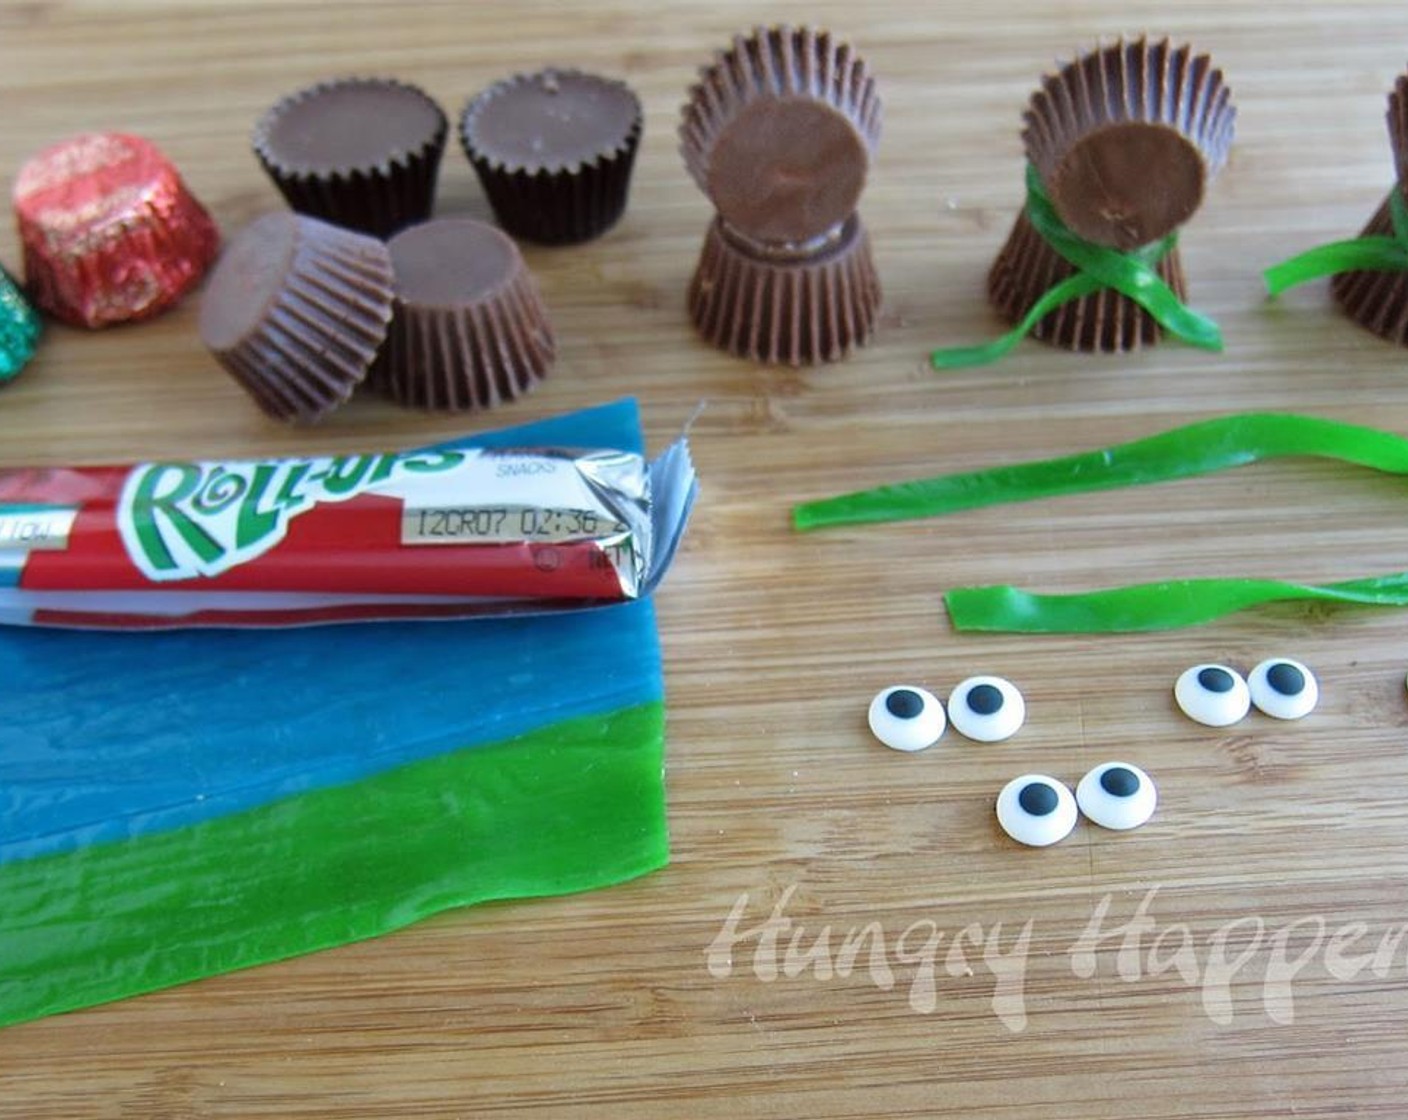 step 1 Unwrap Miniature Reese`s Cup (24) removing the foil and the paper cup. Open the bag of M&M's® Milk Chocolate Candy (1 pckg) and set aside the red-colored M&M's. Set aside 2 green-colored Fruit Roll-Ups (2).